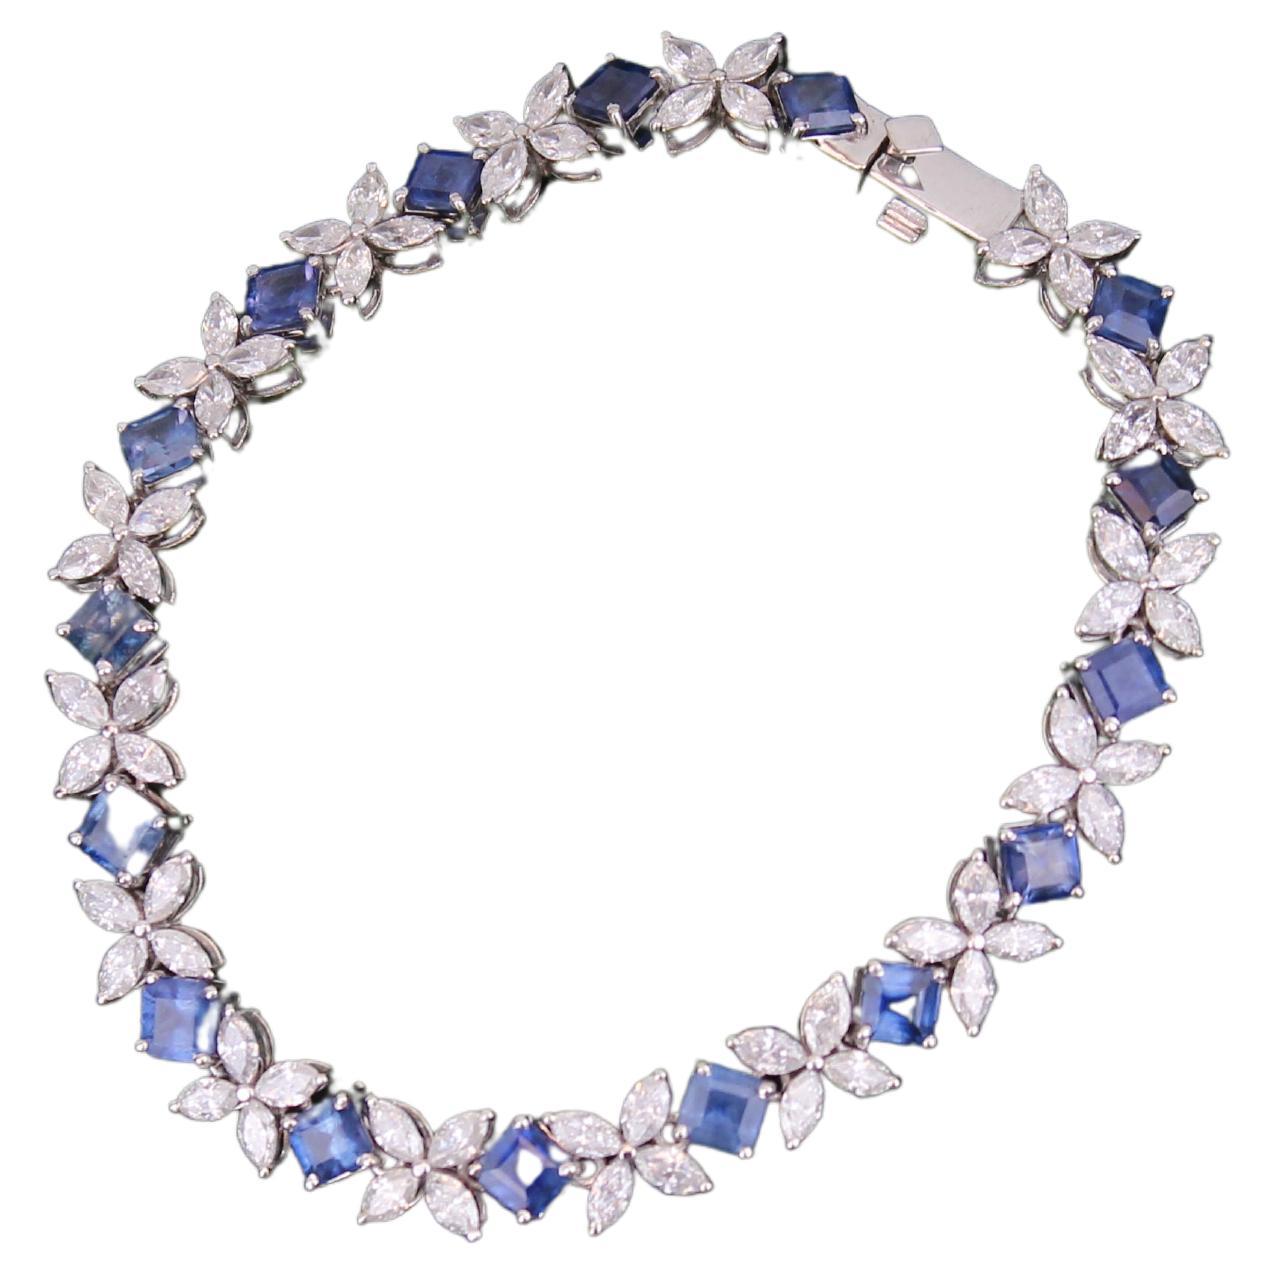 Marquise Diamond Tennis Bracelet with Princess Cut Blue Sapphires in 18k Gold